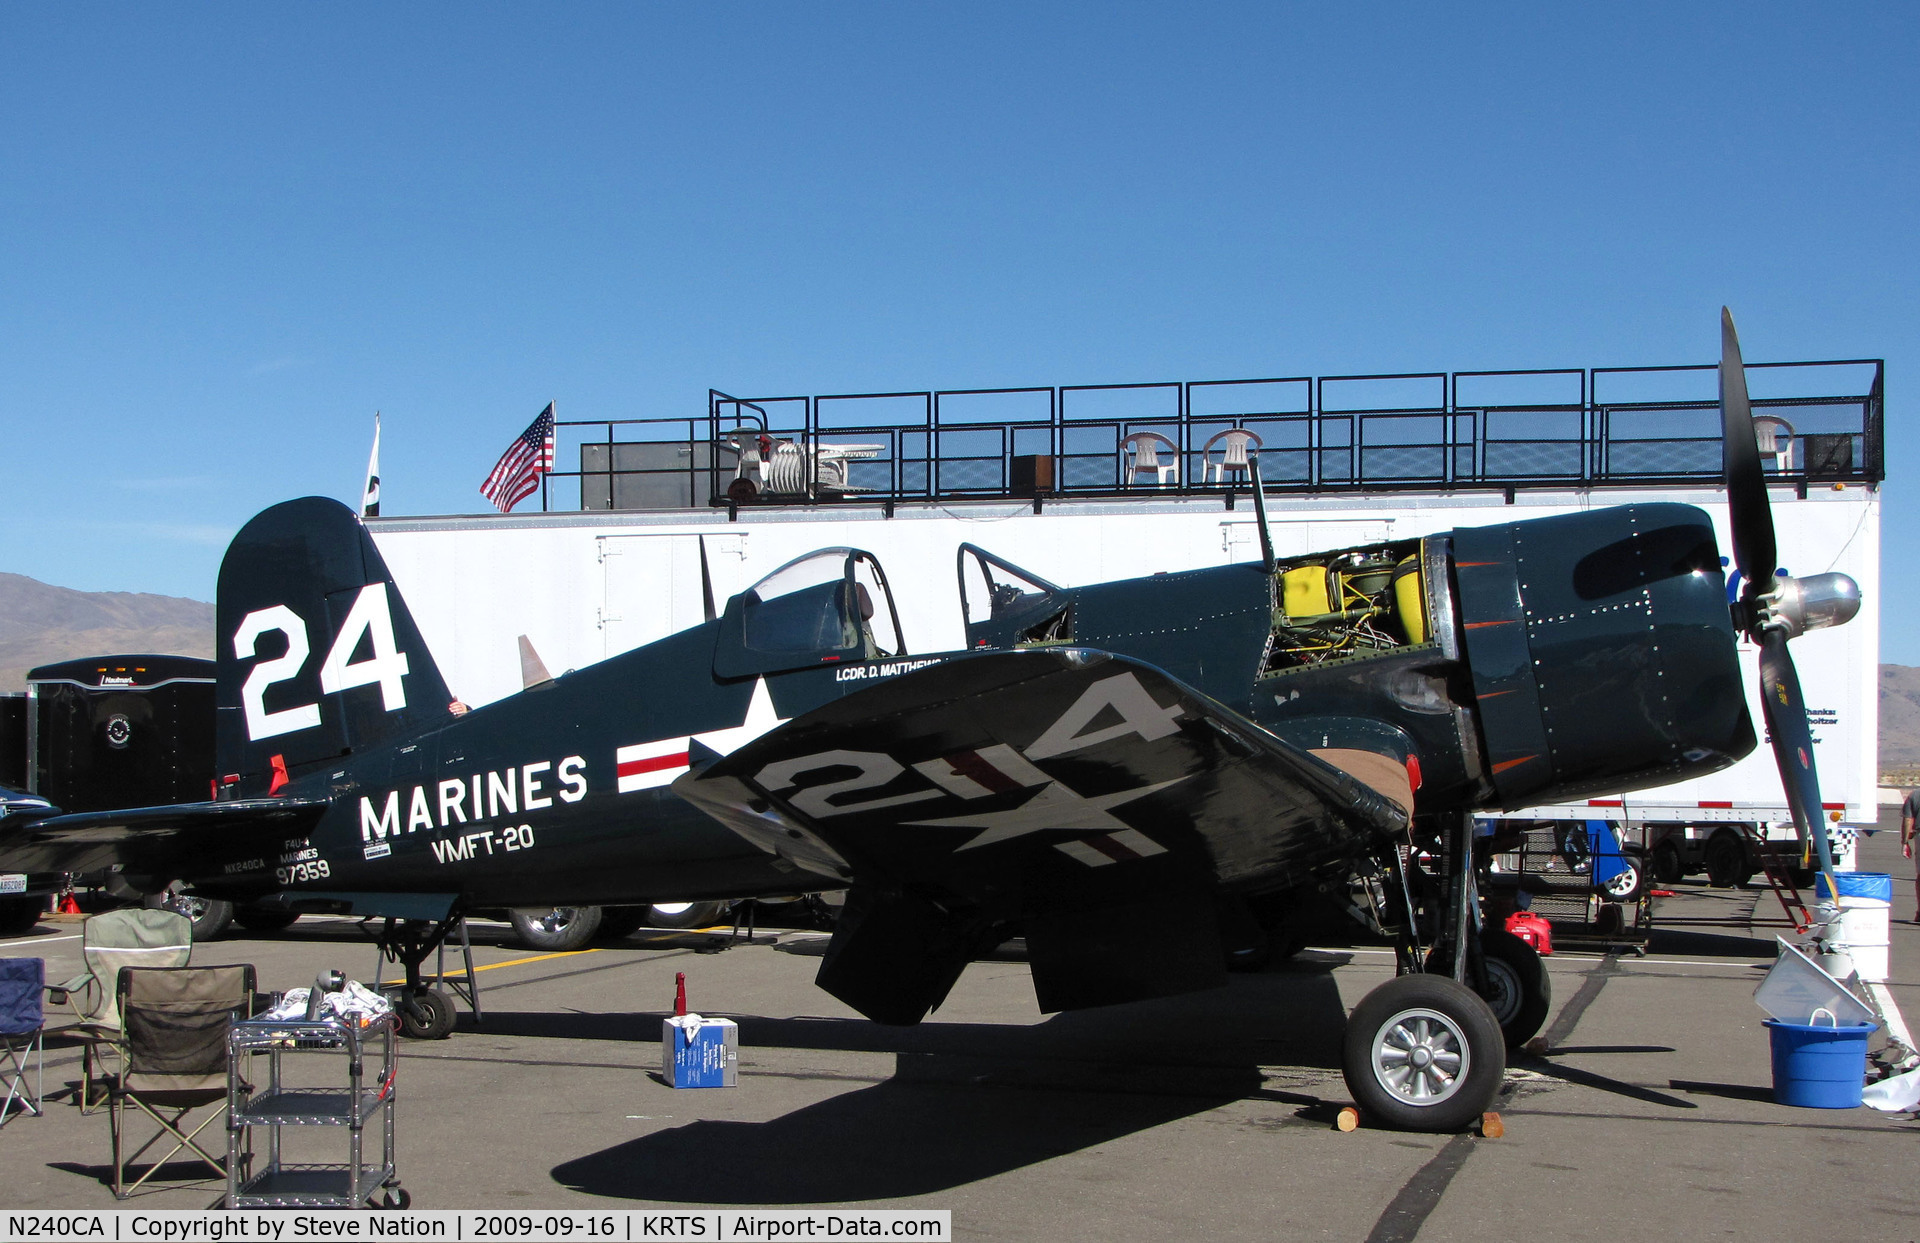 N240CA, 1945 Vought F4U-4 Corsair C/N 9513, Race #24 F4U-4 BuAer 97359 VMFT-20 Marines being worked on pits as NX240CA for Unlimited Class race @ 2009 Reno Air Races